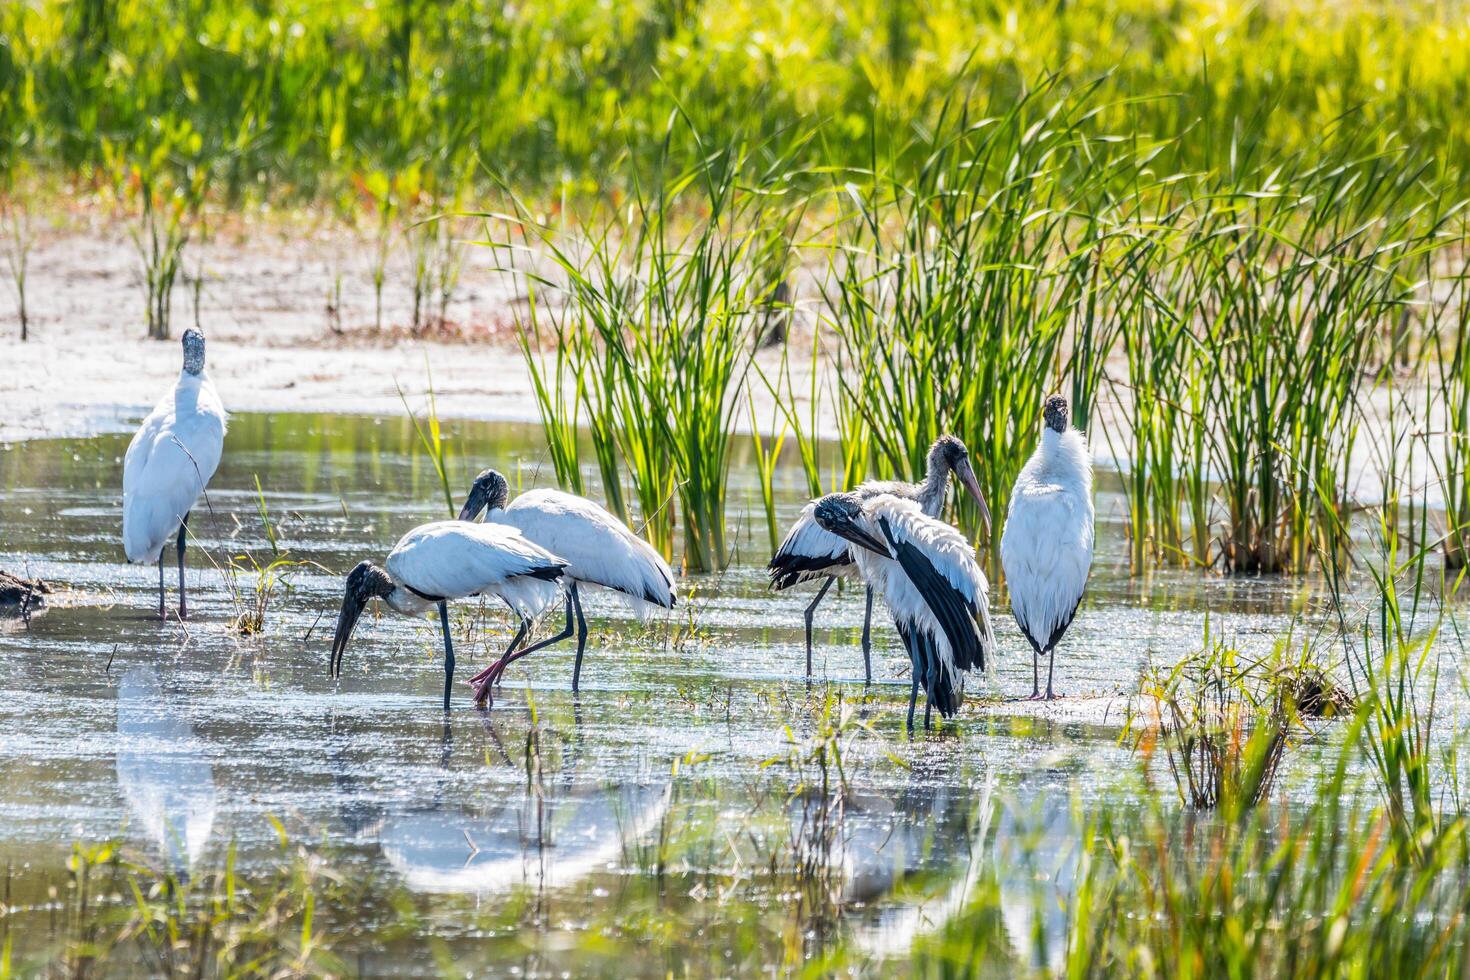 Wood storks at the wetlands photo